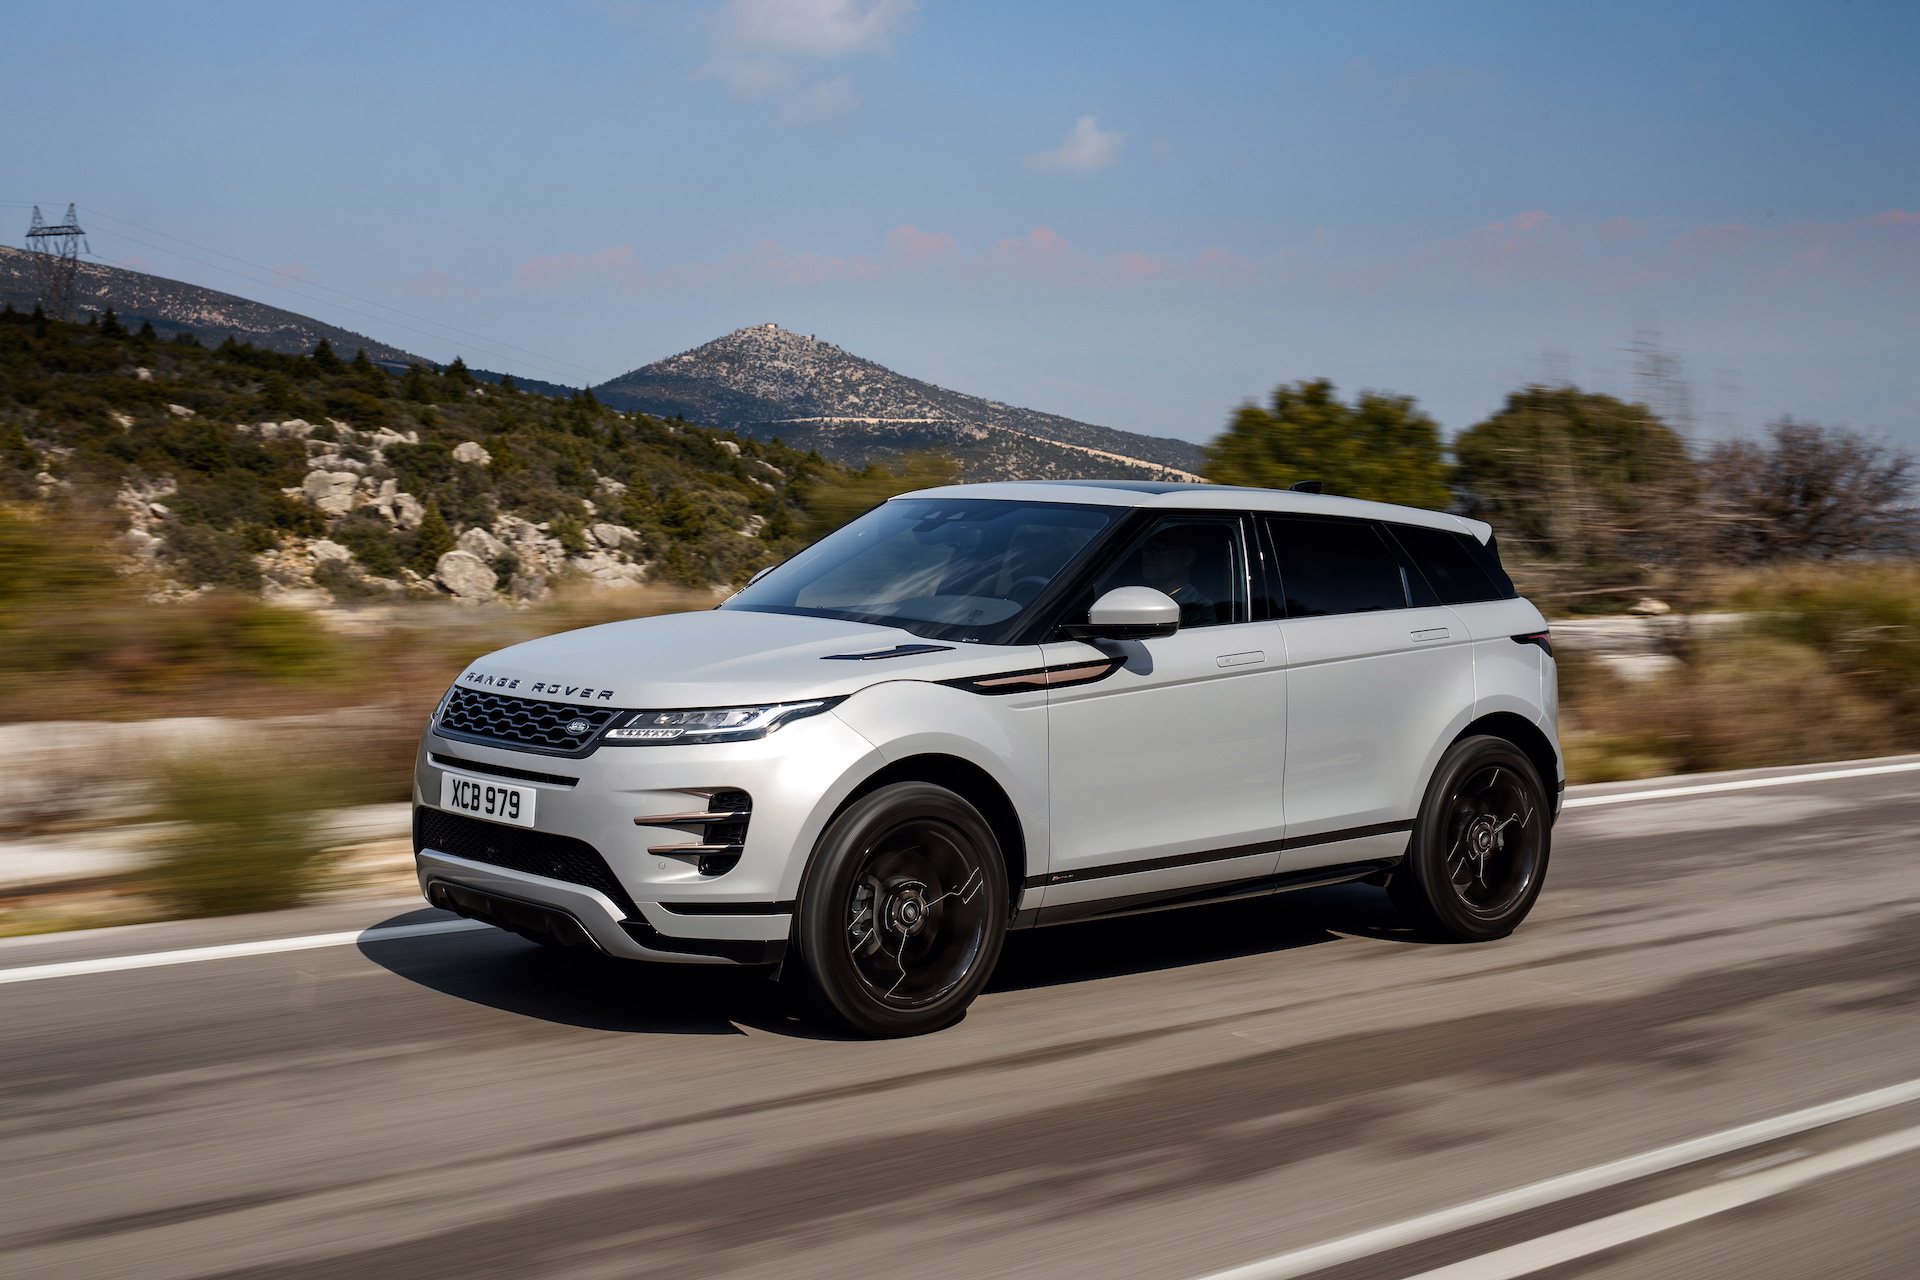 First drive review: The 2020 Land Rover Range Rover Evoque adds more gray  with its own Grecian formula